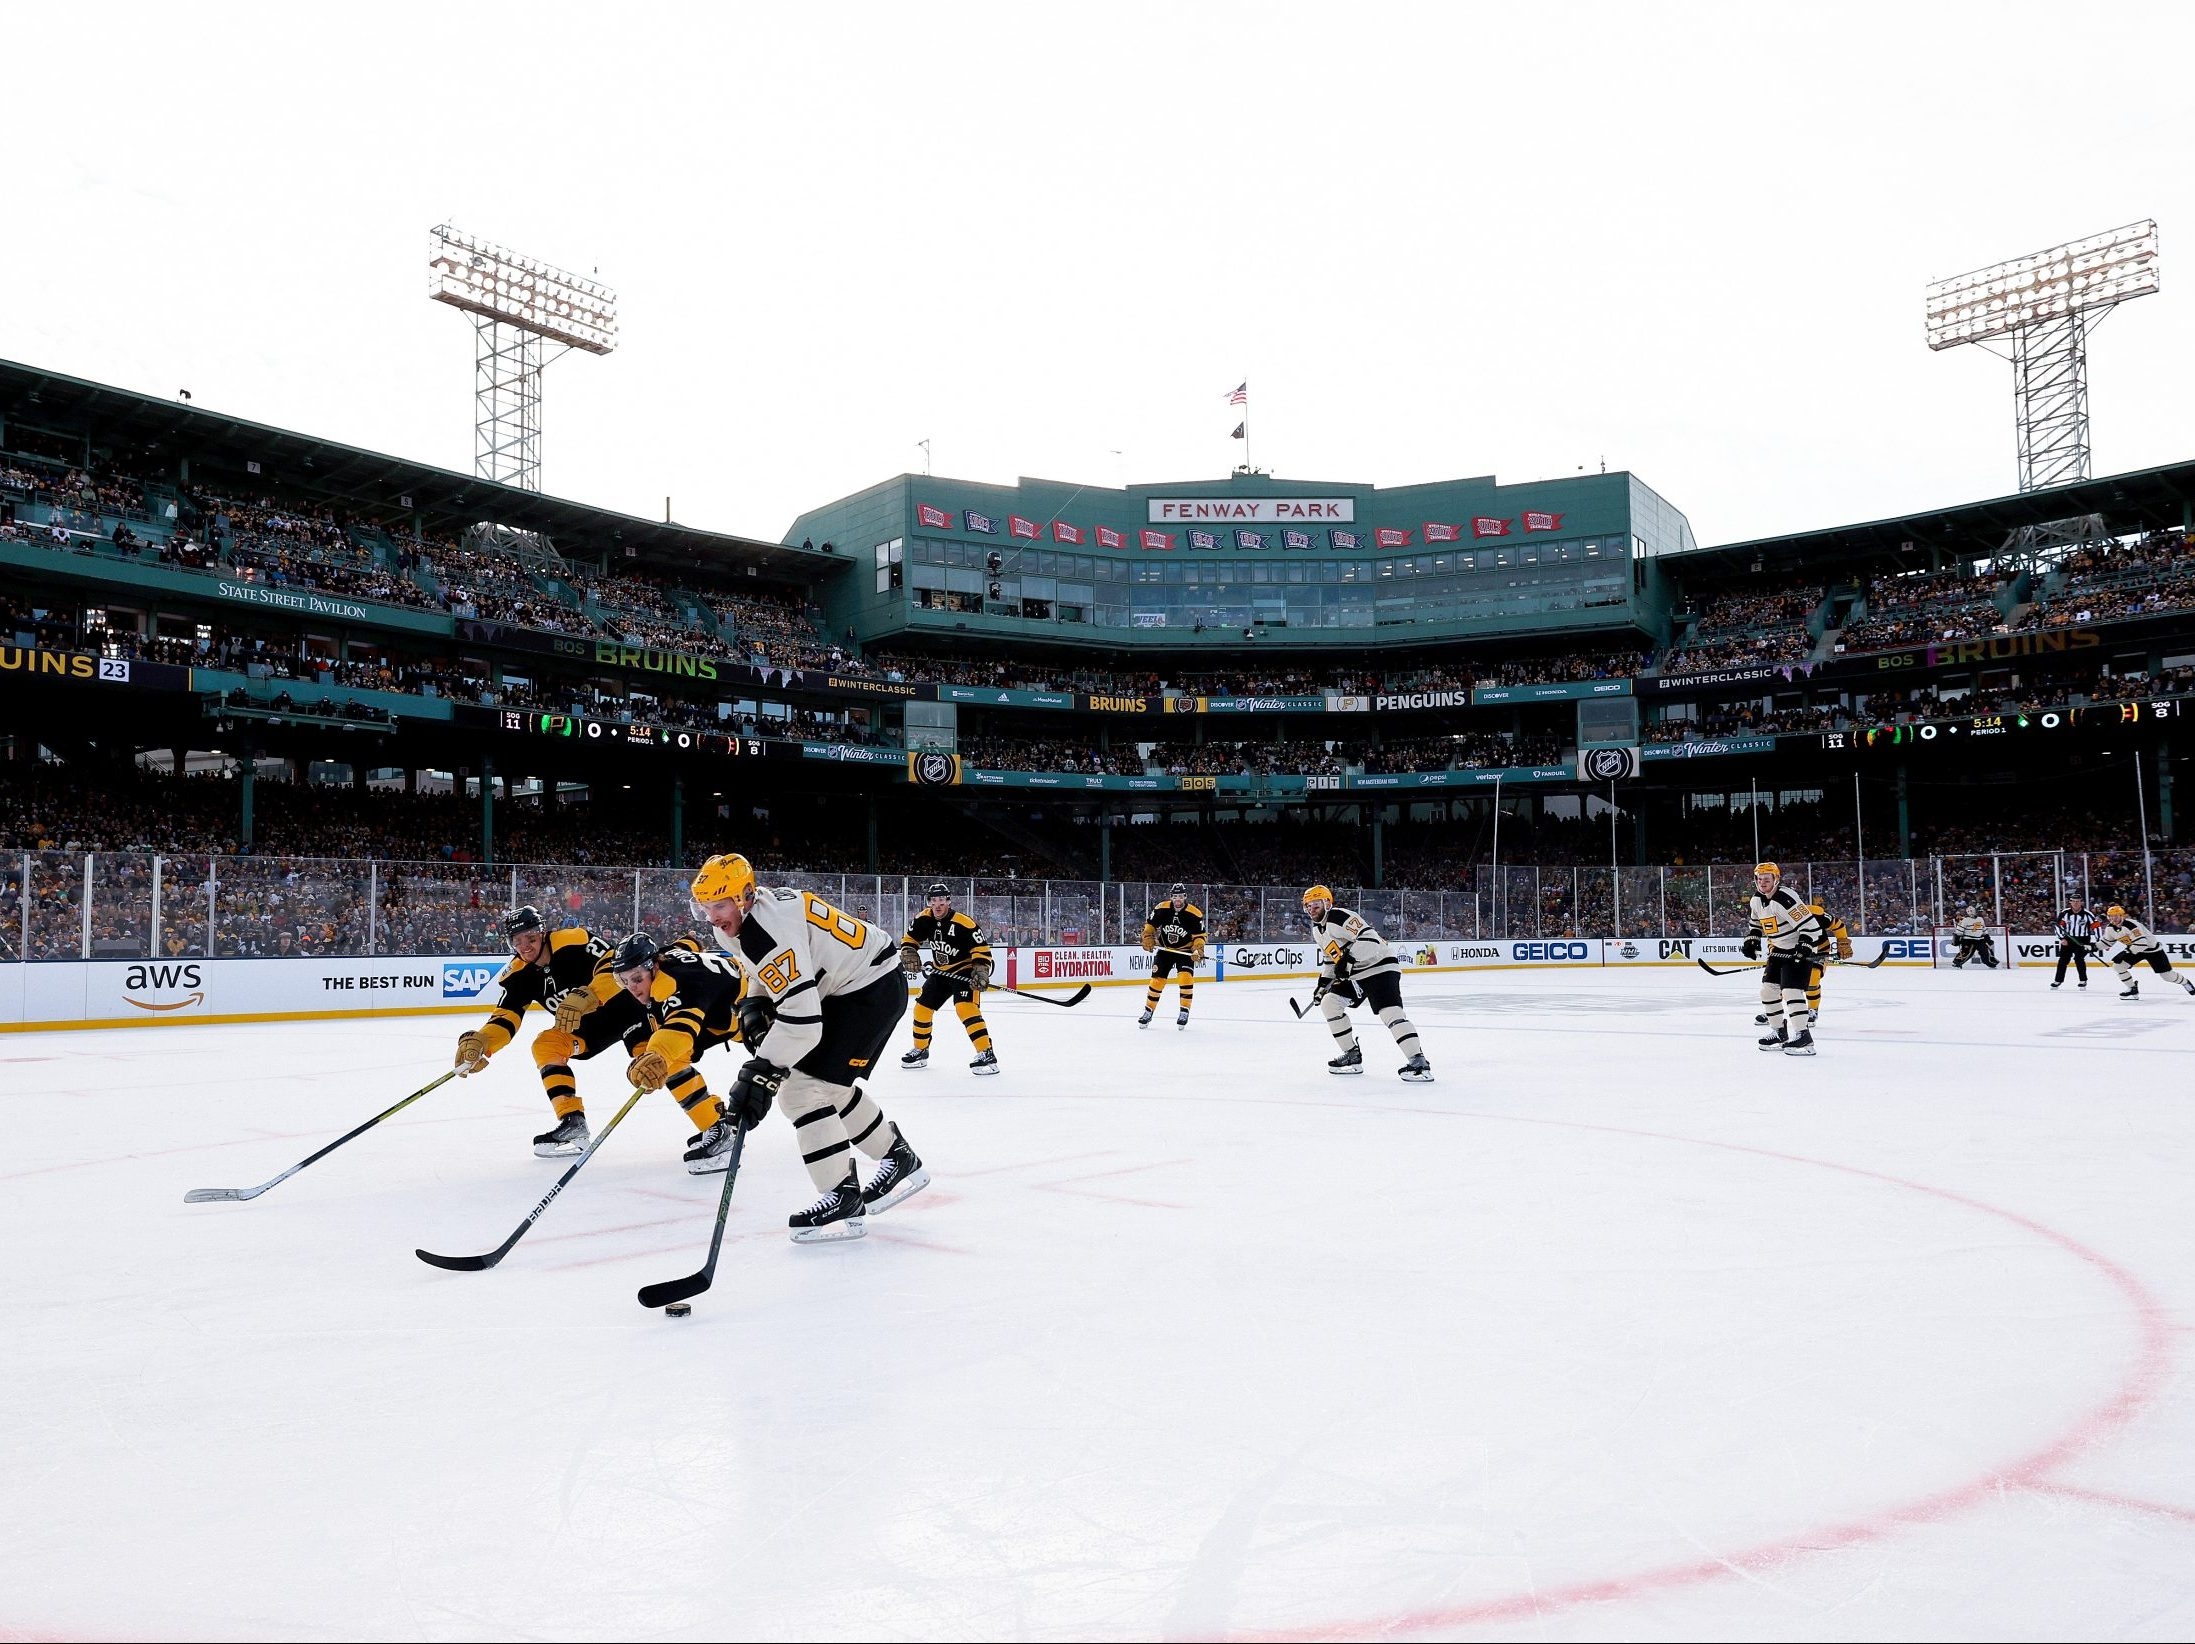 Fenway Park to host college, NHL hockey games in 2023